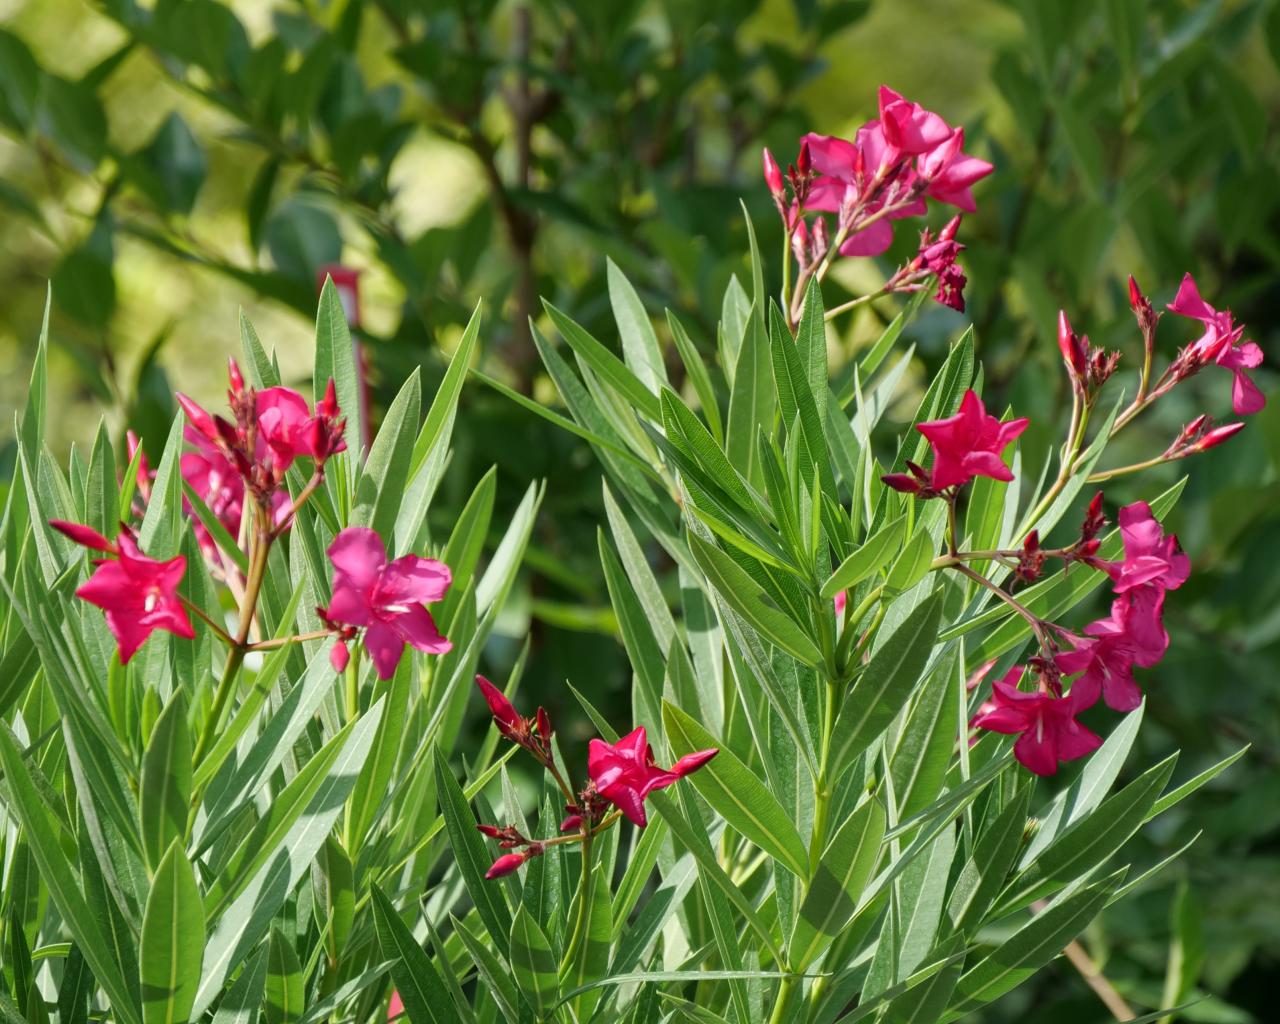 oleander is a beautiful but poisonous shrub | hgtv